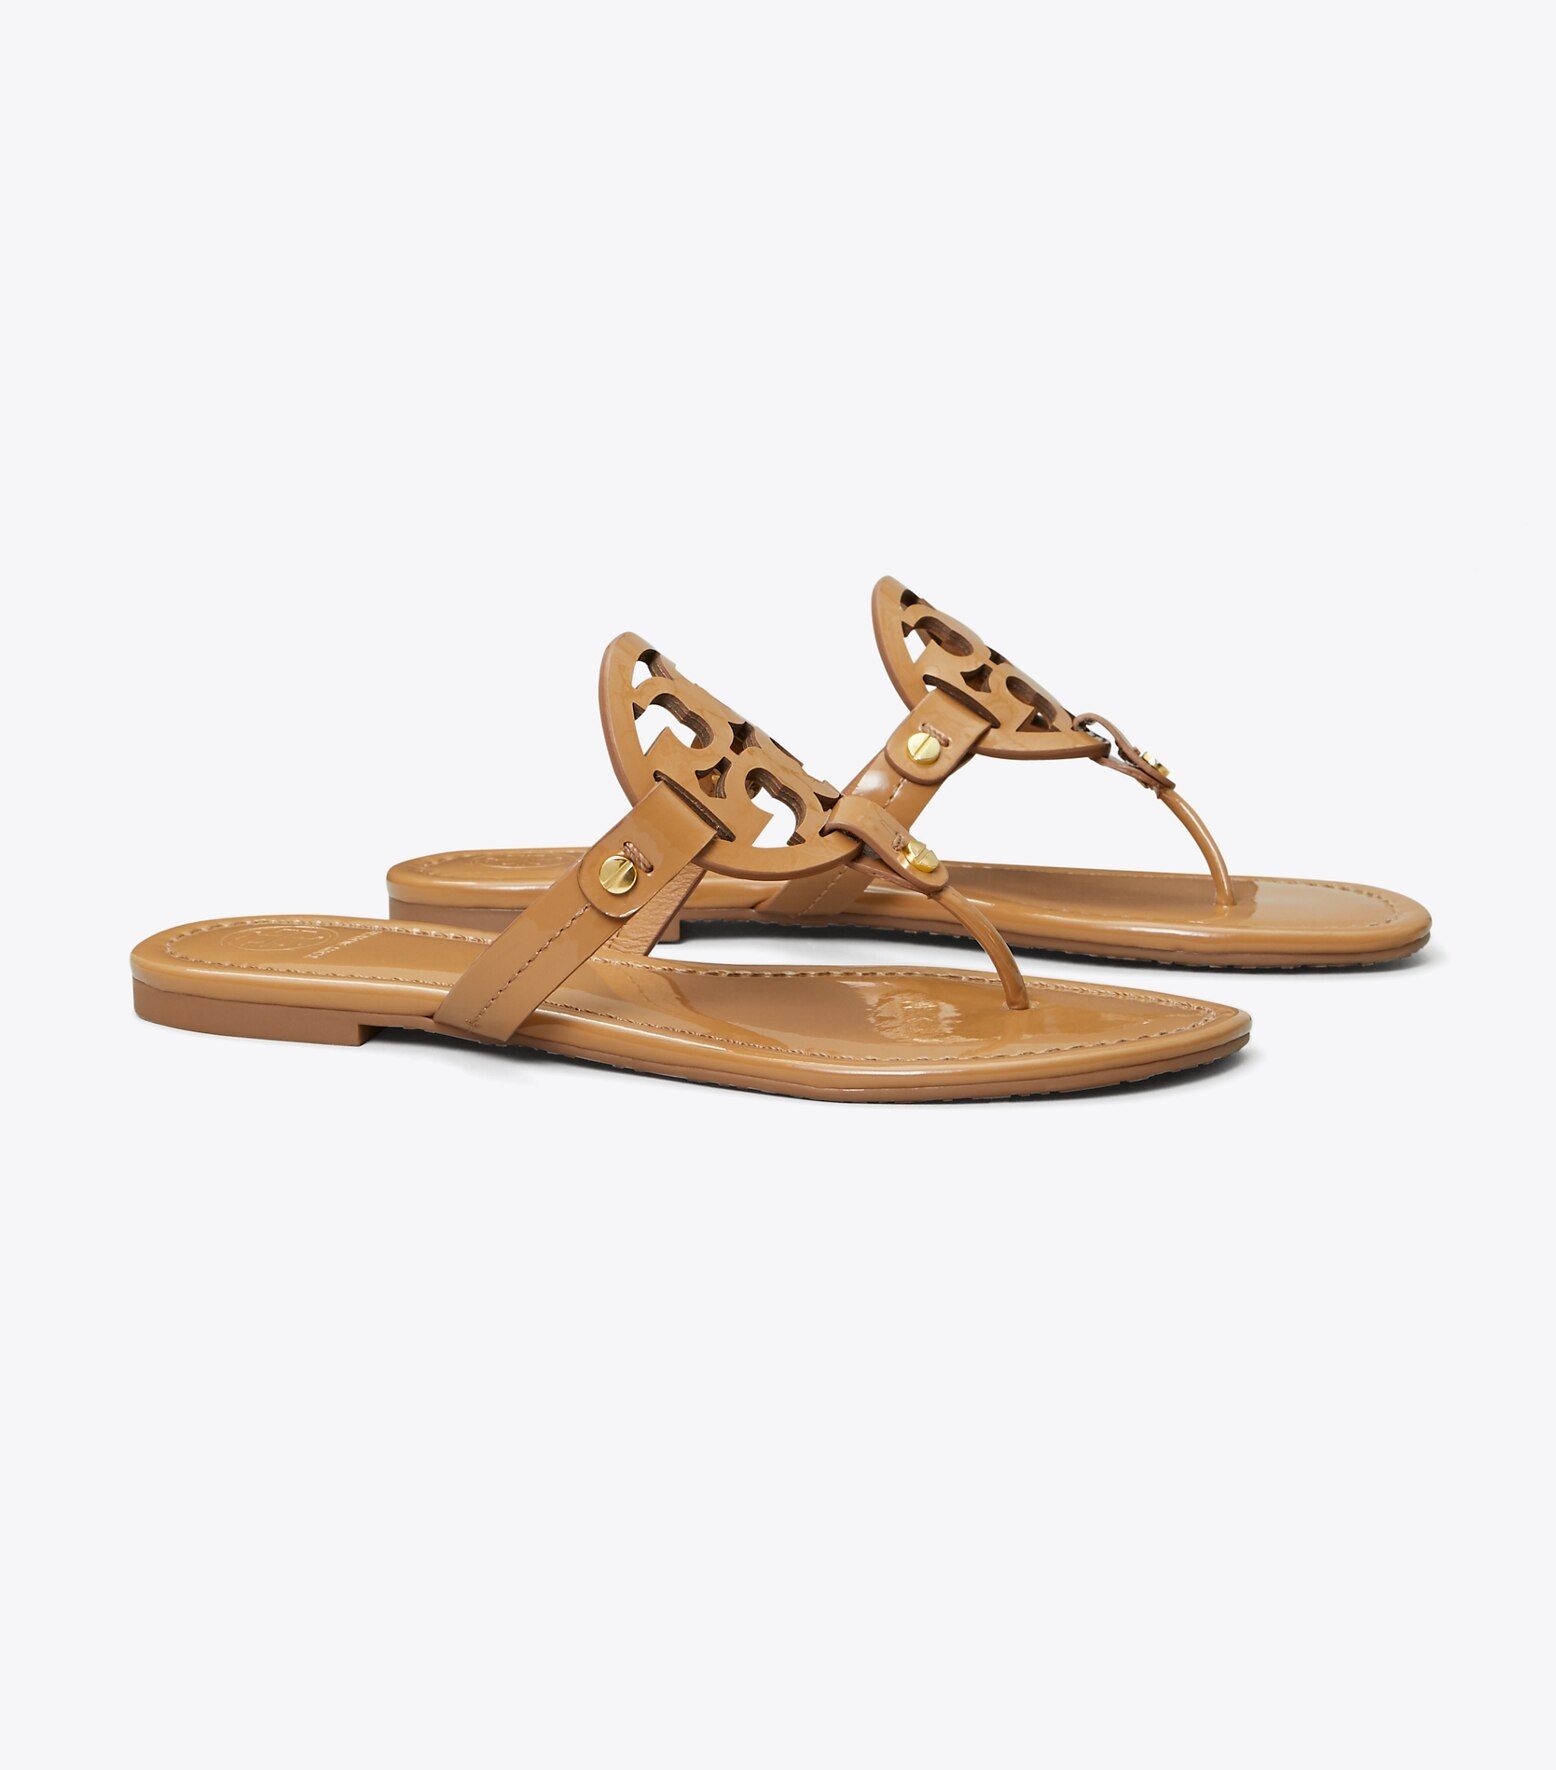 Tory Burch Miller Sandal, Patent Leather: Women's Shoes  | Tory Burch | Tory Burch (US)